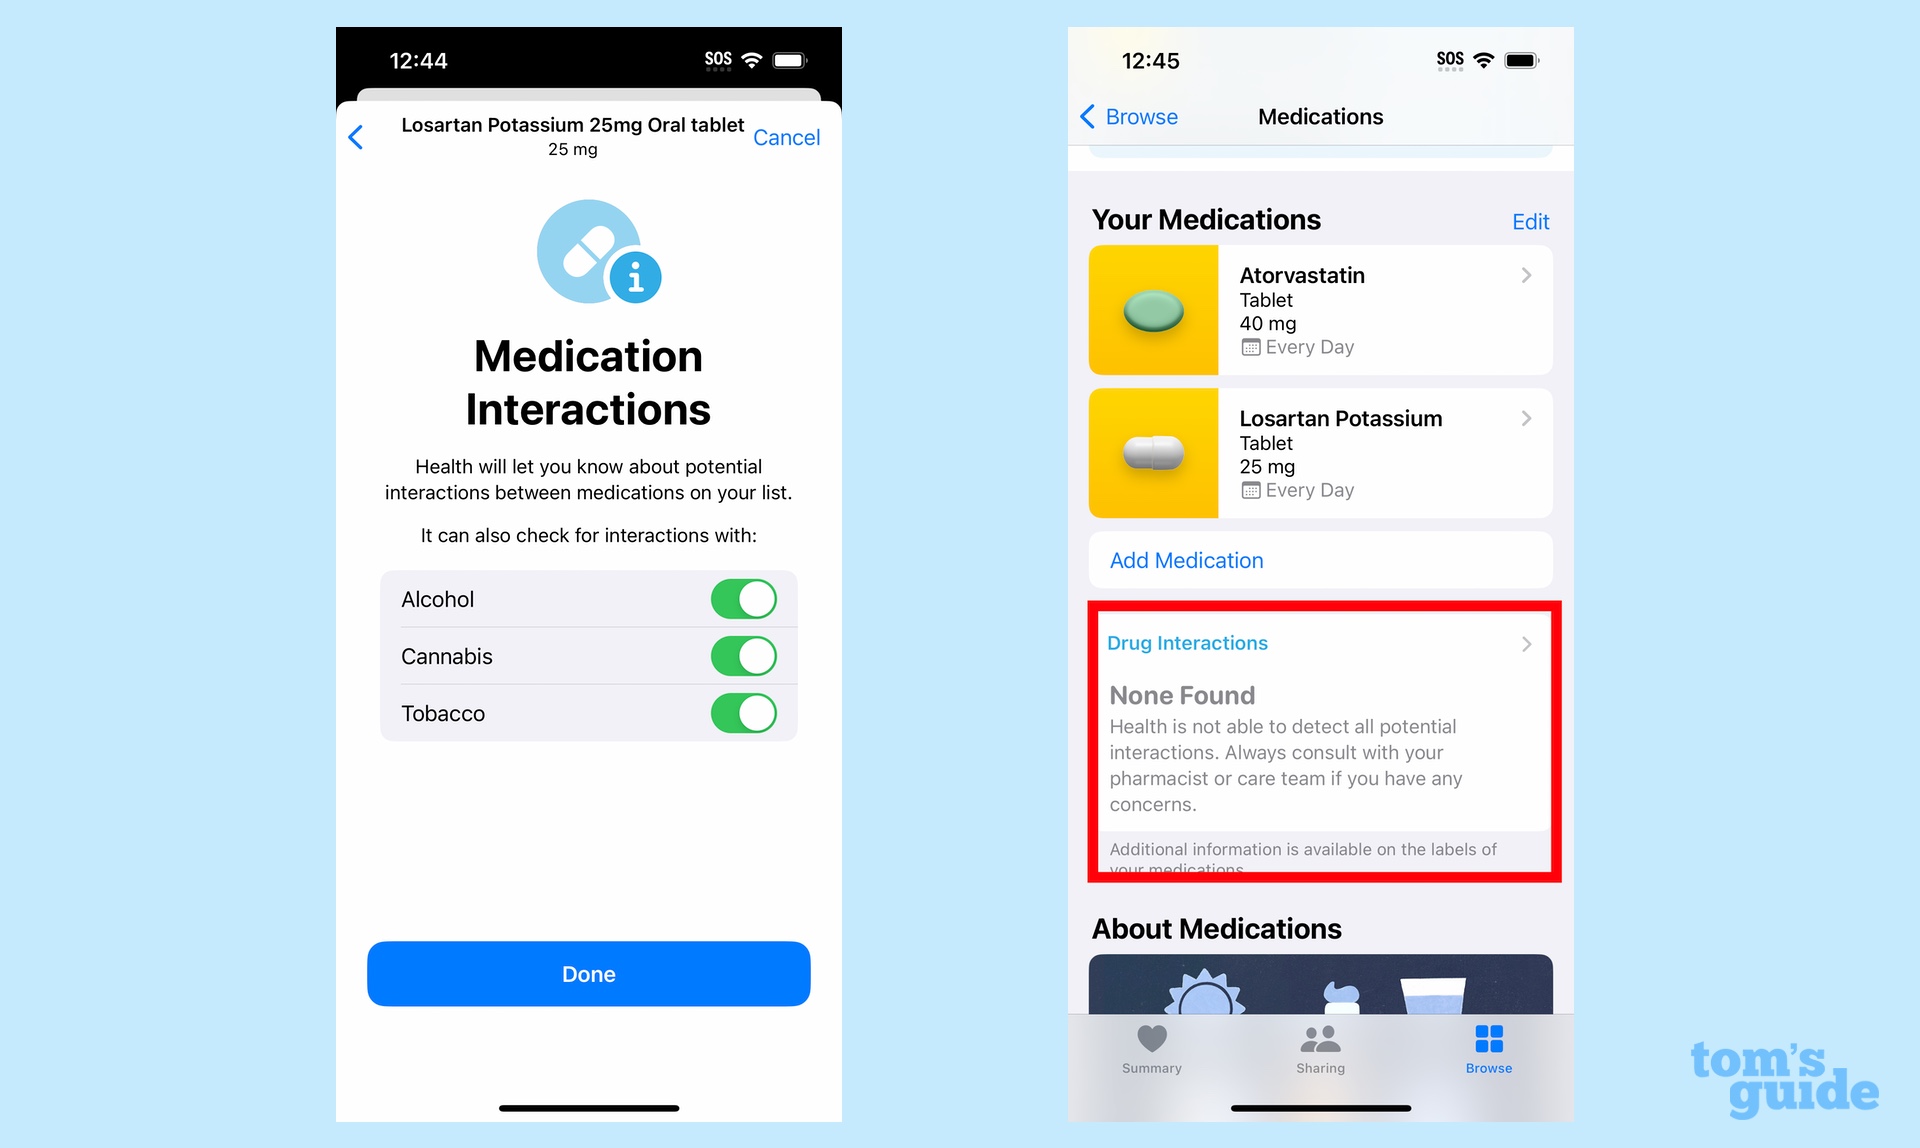 iOS 16 Medications shows drug interactions